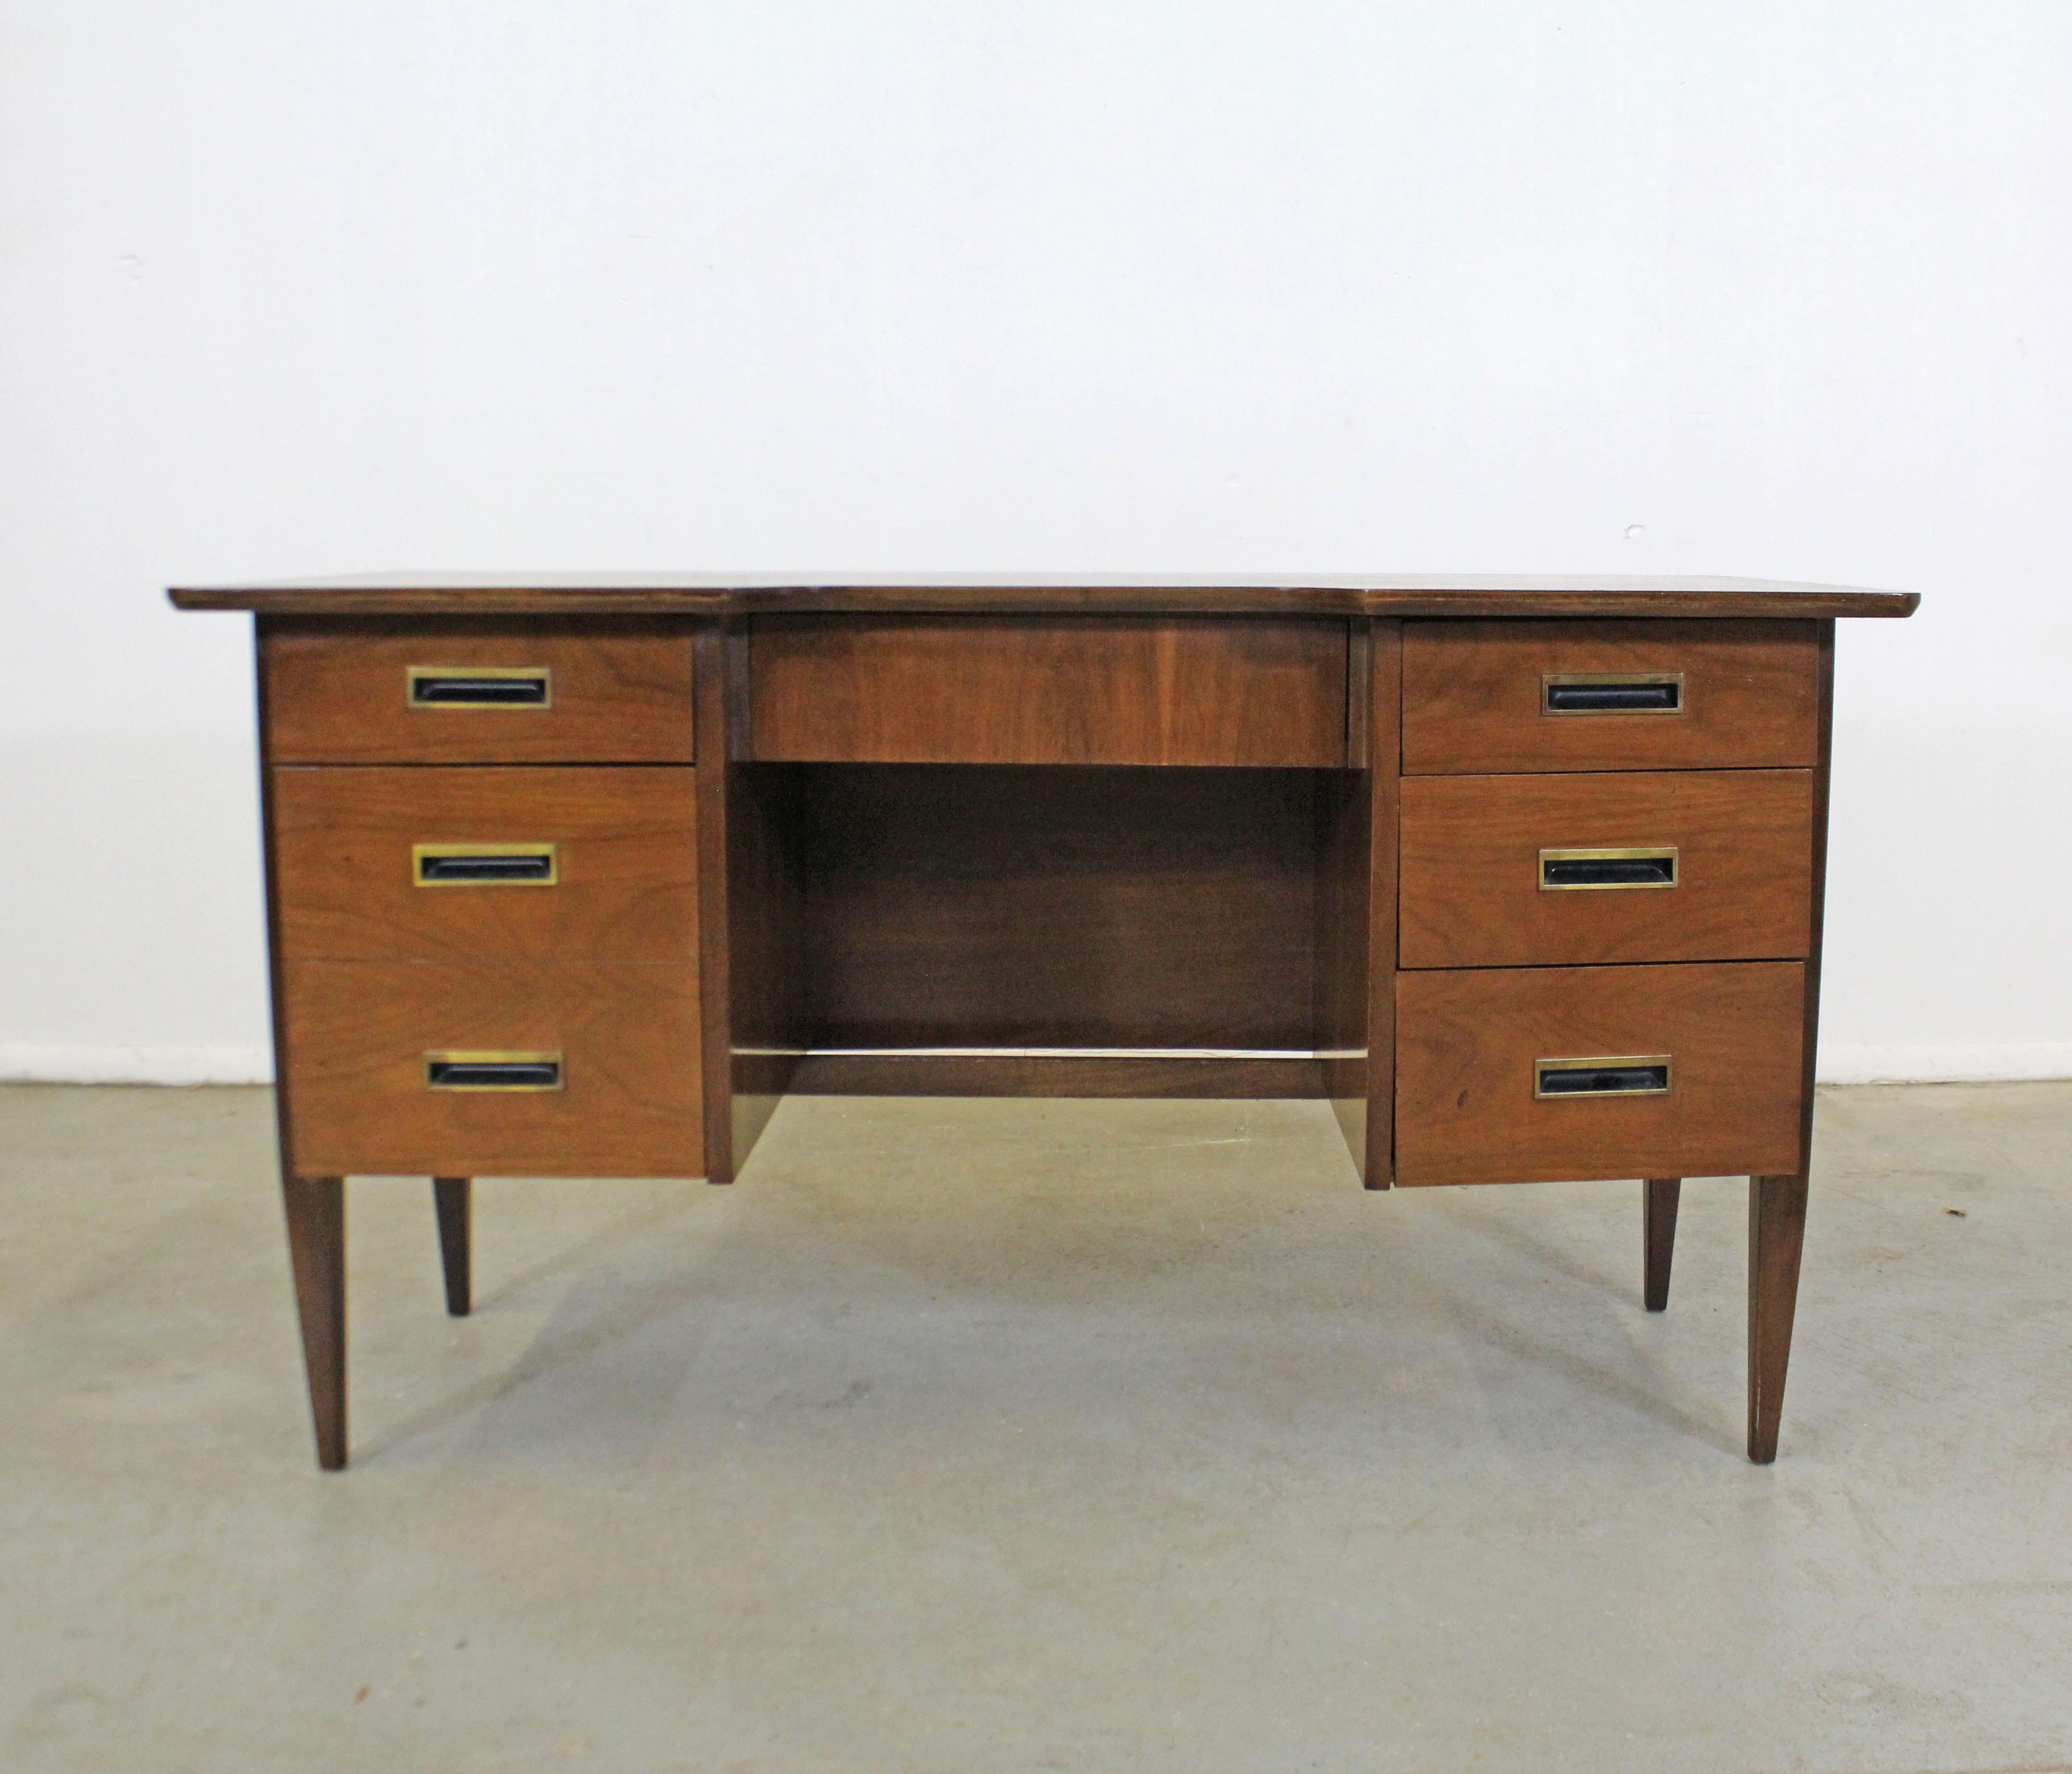 Offered is a vintage Mid-Century Modern attributed to Hooker Furniture. This walnut desk has been refinished and features six dovetailed drawers with recessed brass pulls, three on the right, two on the left. See pictures for details. In good,